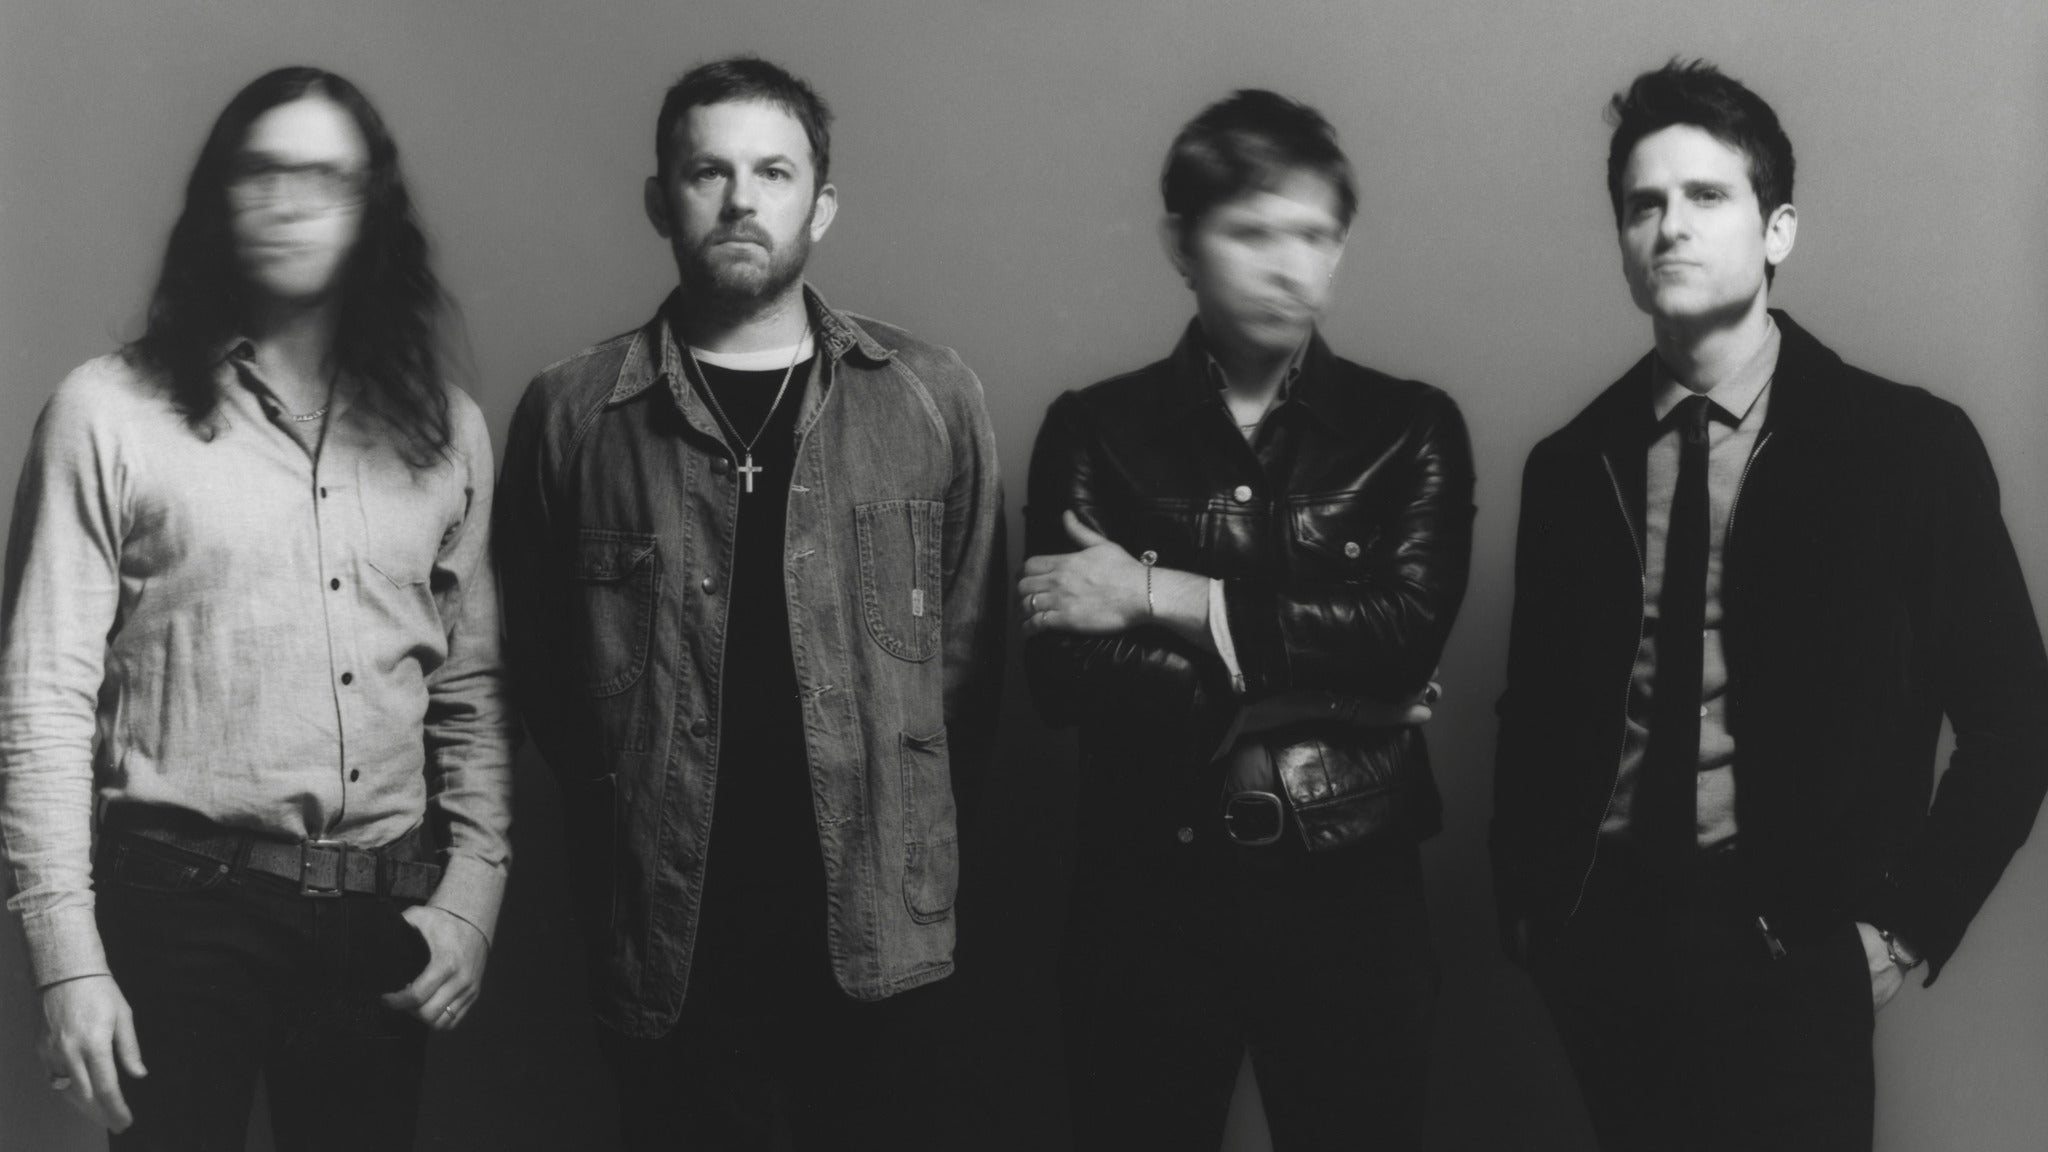 Kings of Leon: When You See Yourself Tour in Auburn promo photo for Official Platinum presale offer code